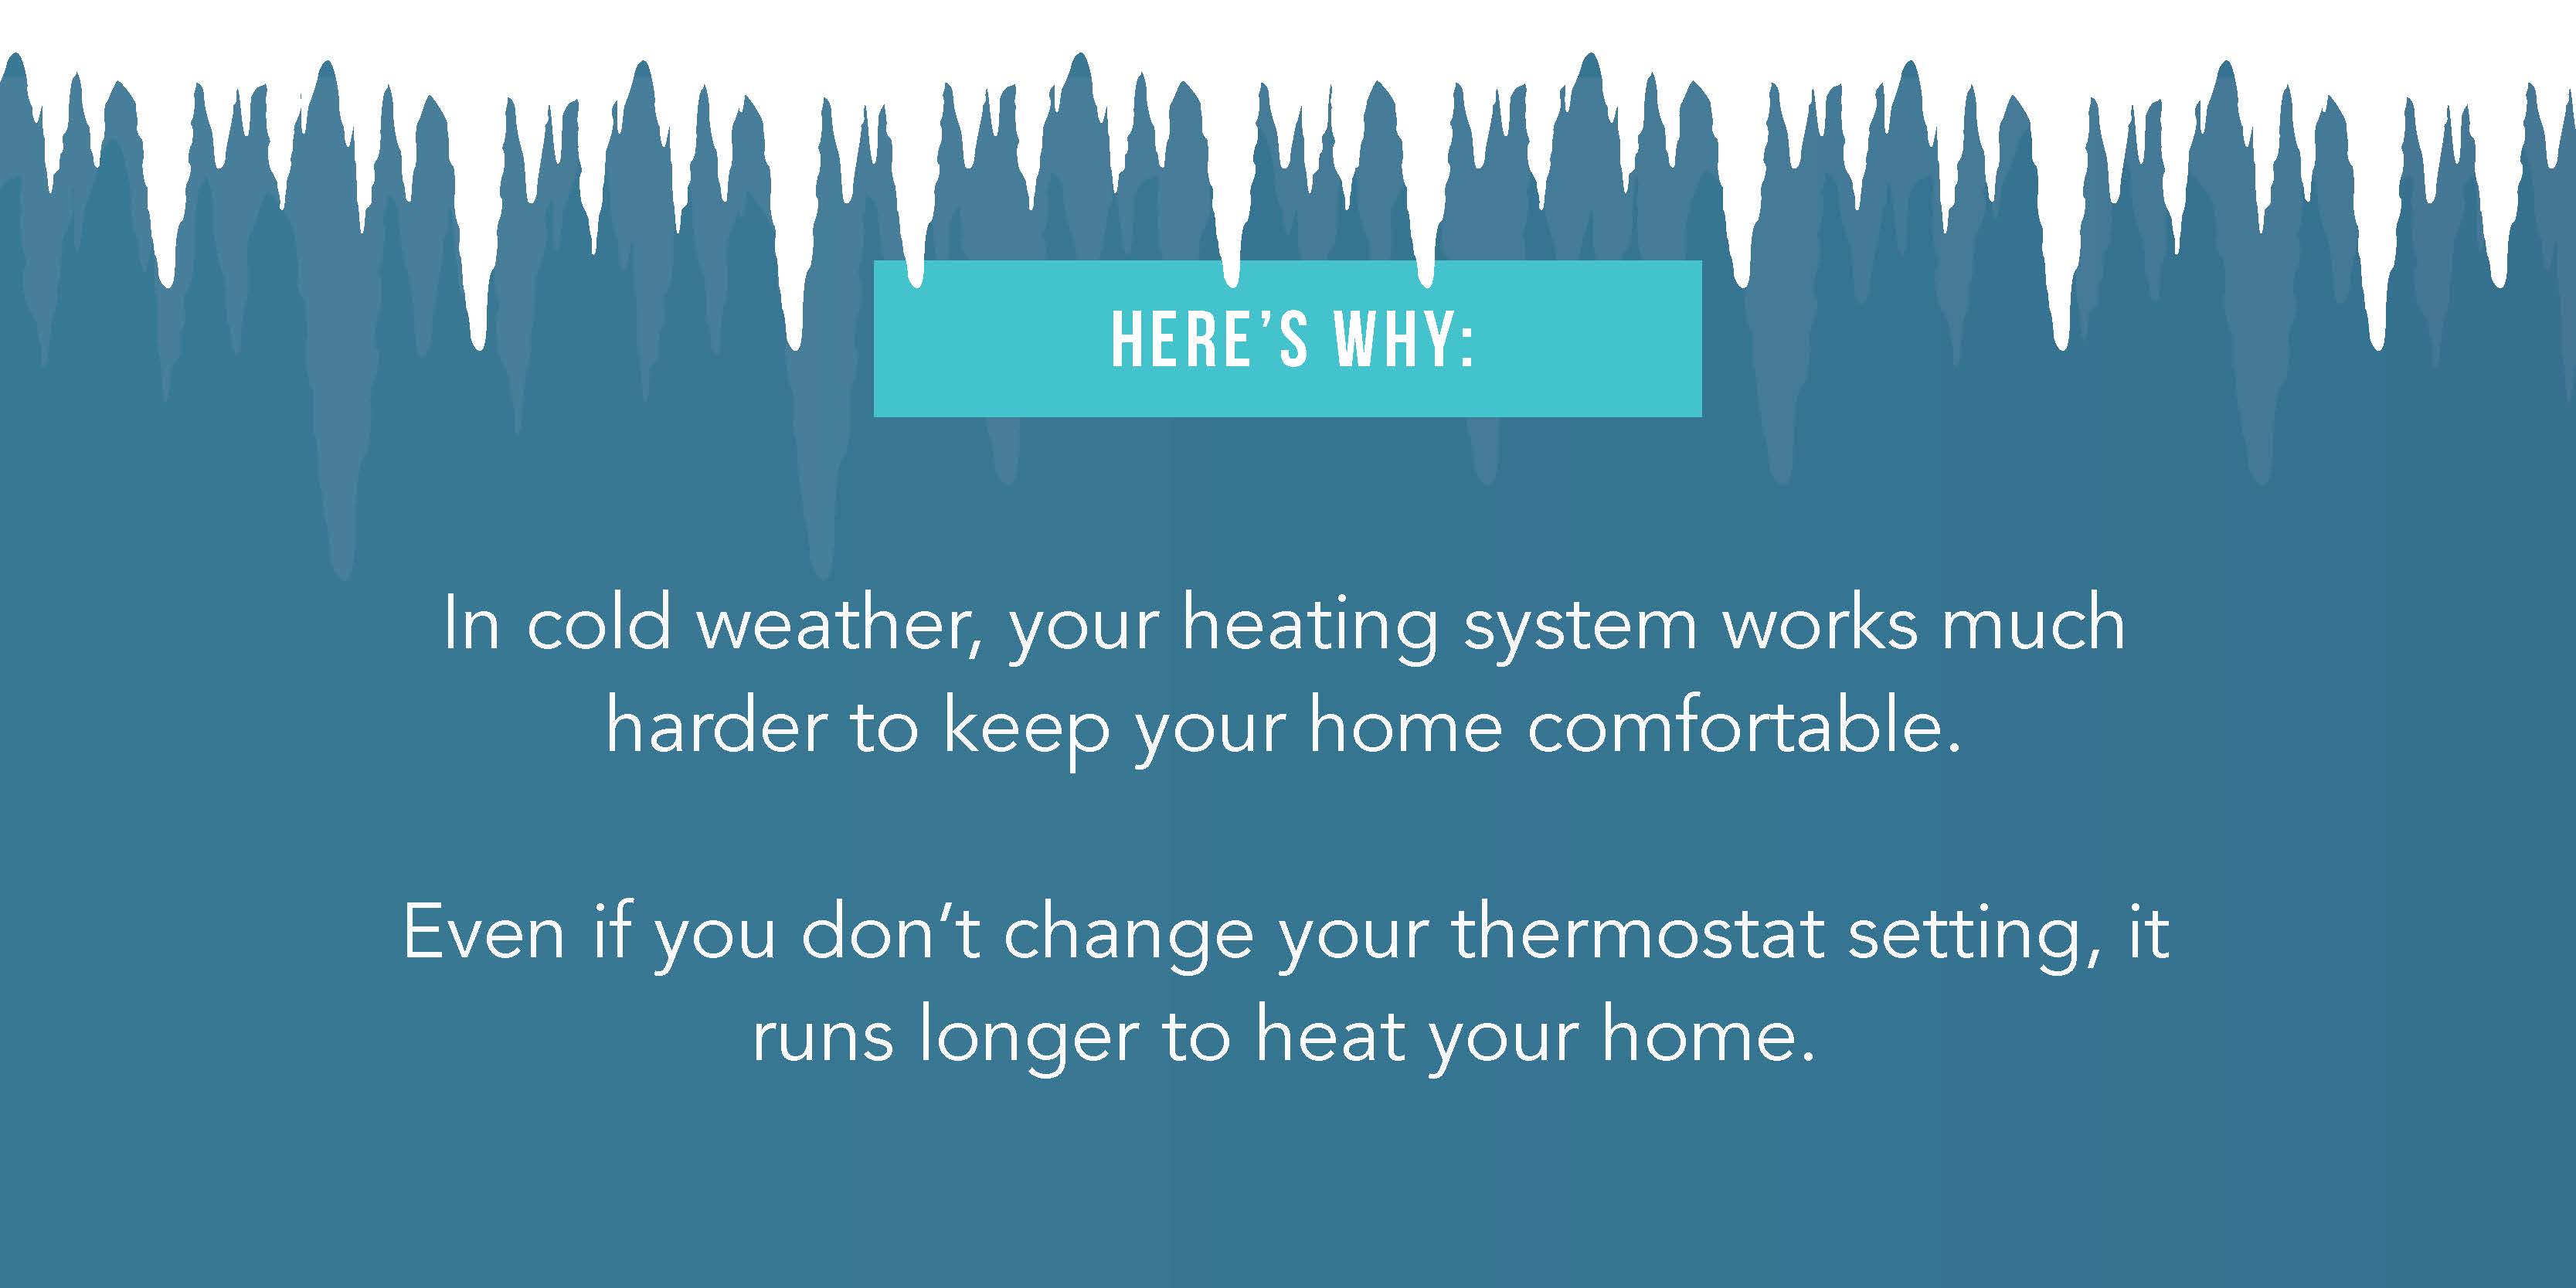 Icicles on a blue background with text under "In cold weather, your heating system works much harder to keep your home comfortable. Even if you don't change your thermostat setting, it runs longer to heat your home. 